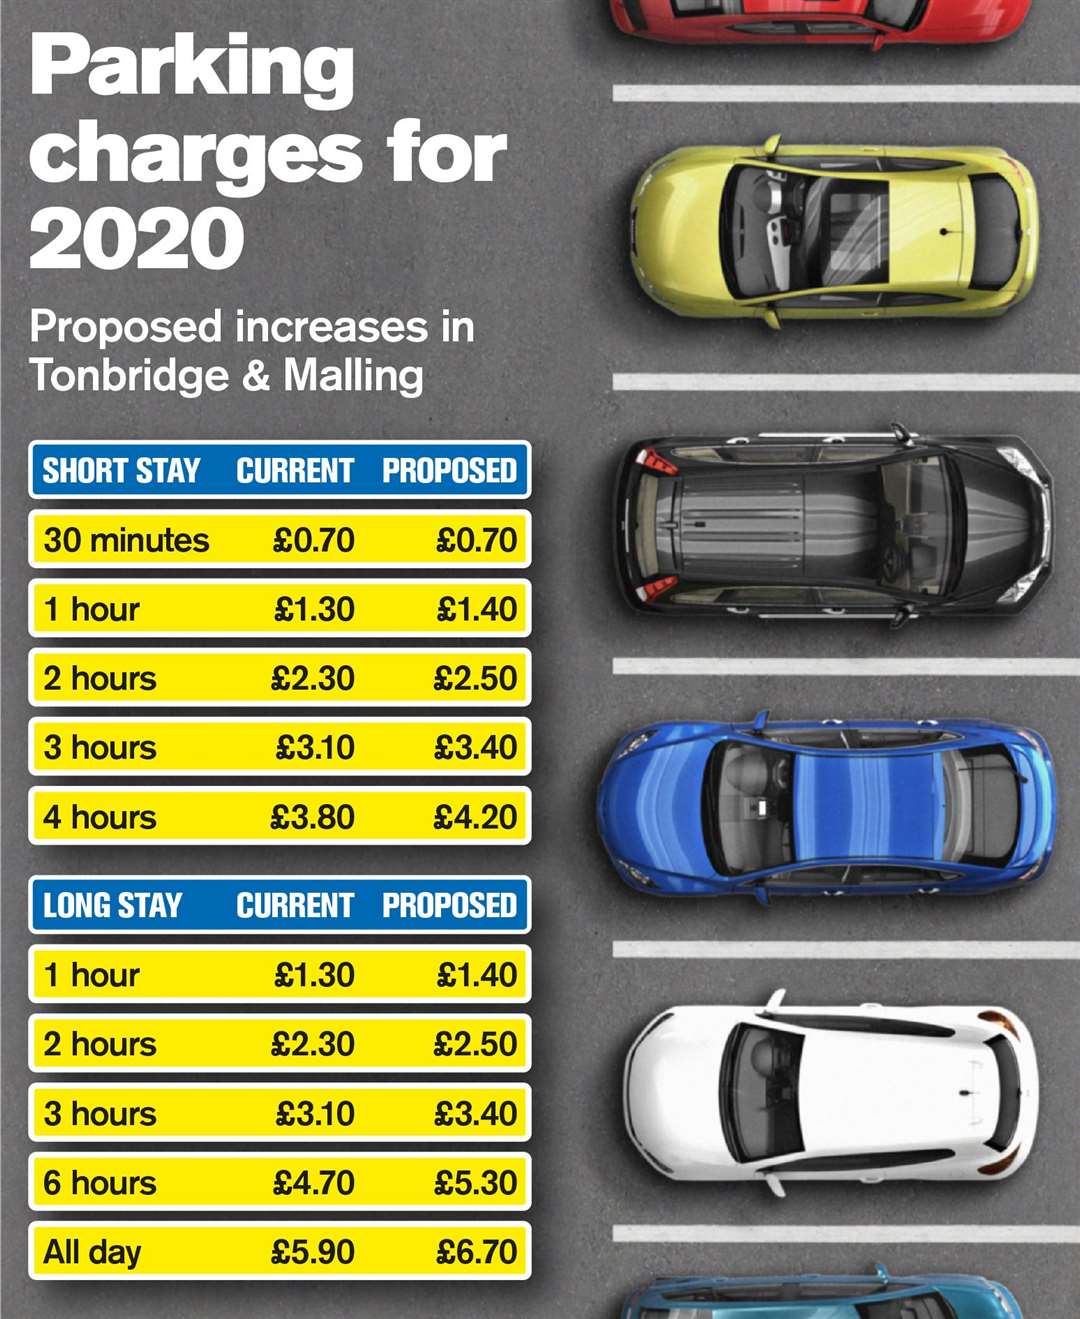 Car parking charges are set to increase in Tonbridge and Malling. Credit to KM Editorial Graphics